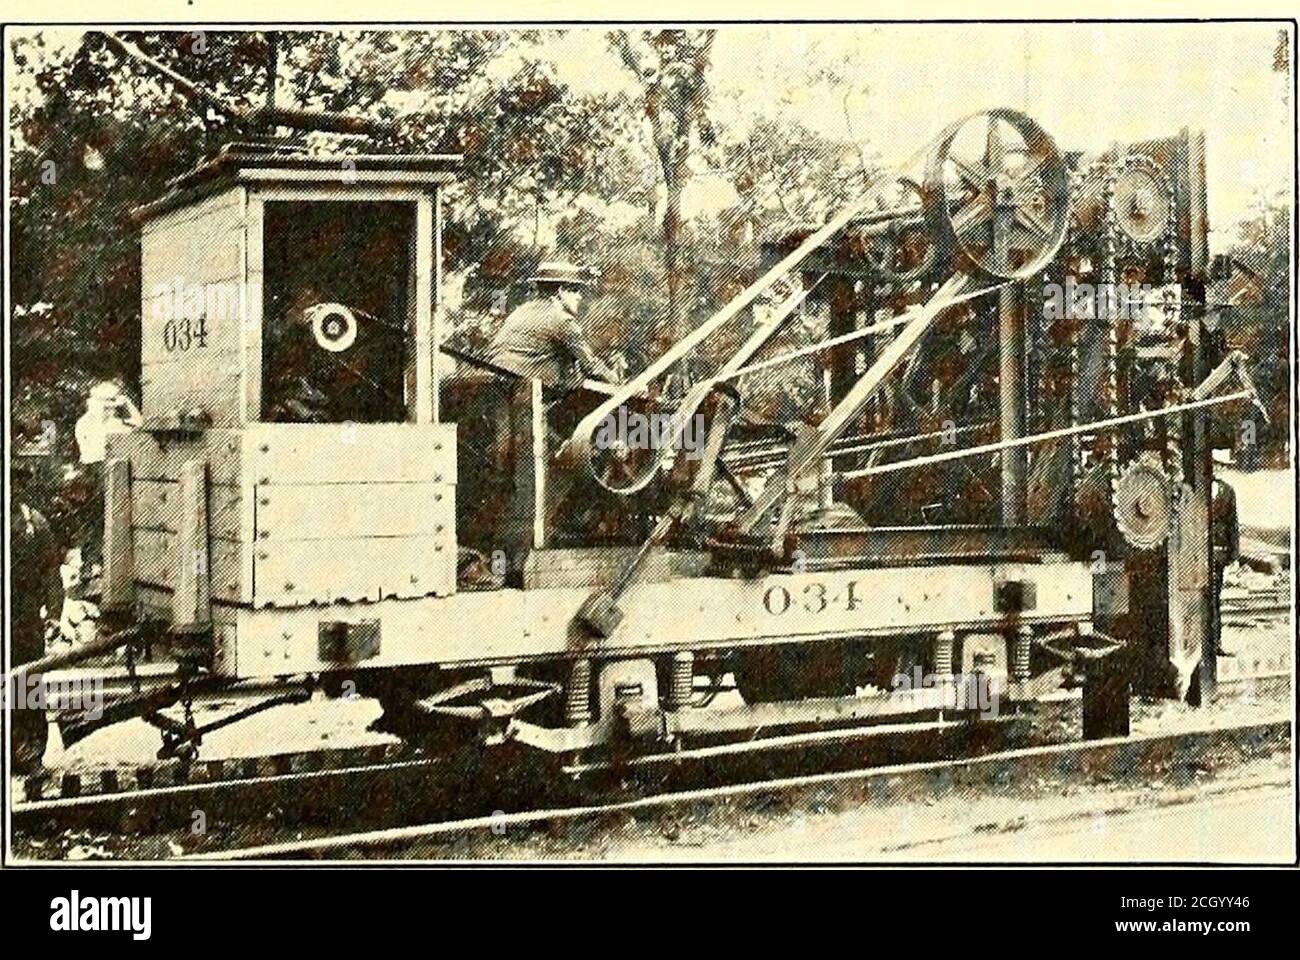 . Electric railway journal . y the whole lengthof the underframe, which consists of four heavy steelchannels extending the entire length of the platform,and tied together by heavy steel end-frame castings.Each channel is riveted to the webs of the end framecastings and to the bolster plates on the bottom. Thebolsters are built up of 1-in. steel plates, 10 in. in widthriveted to all four longitudinal sills. Concrete Breaker in Cleveland THE accompanying illustrations show a new machinedeveloped by Charles H. Clark, engineer mainte-nance of way, Cleveland Railway, to break up the con-crete pavem Stock Photo